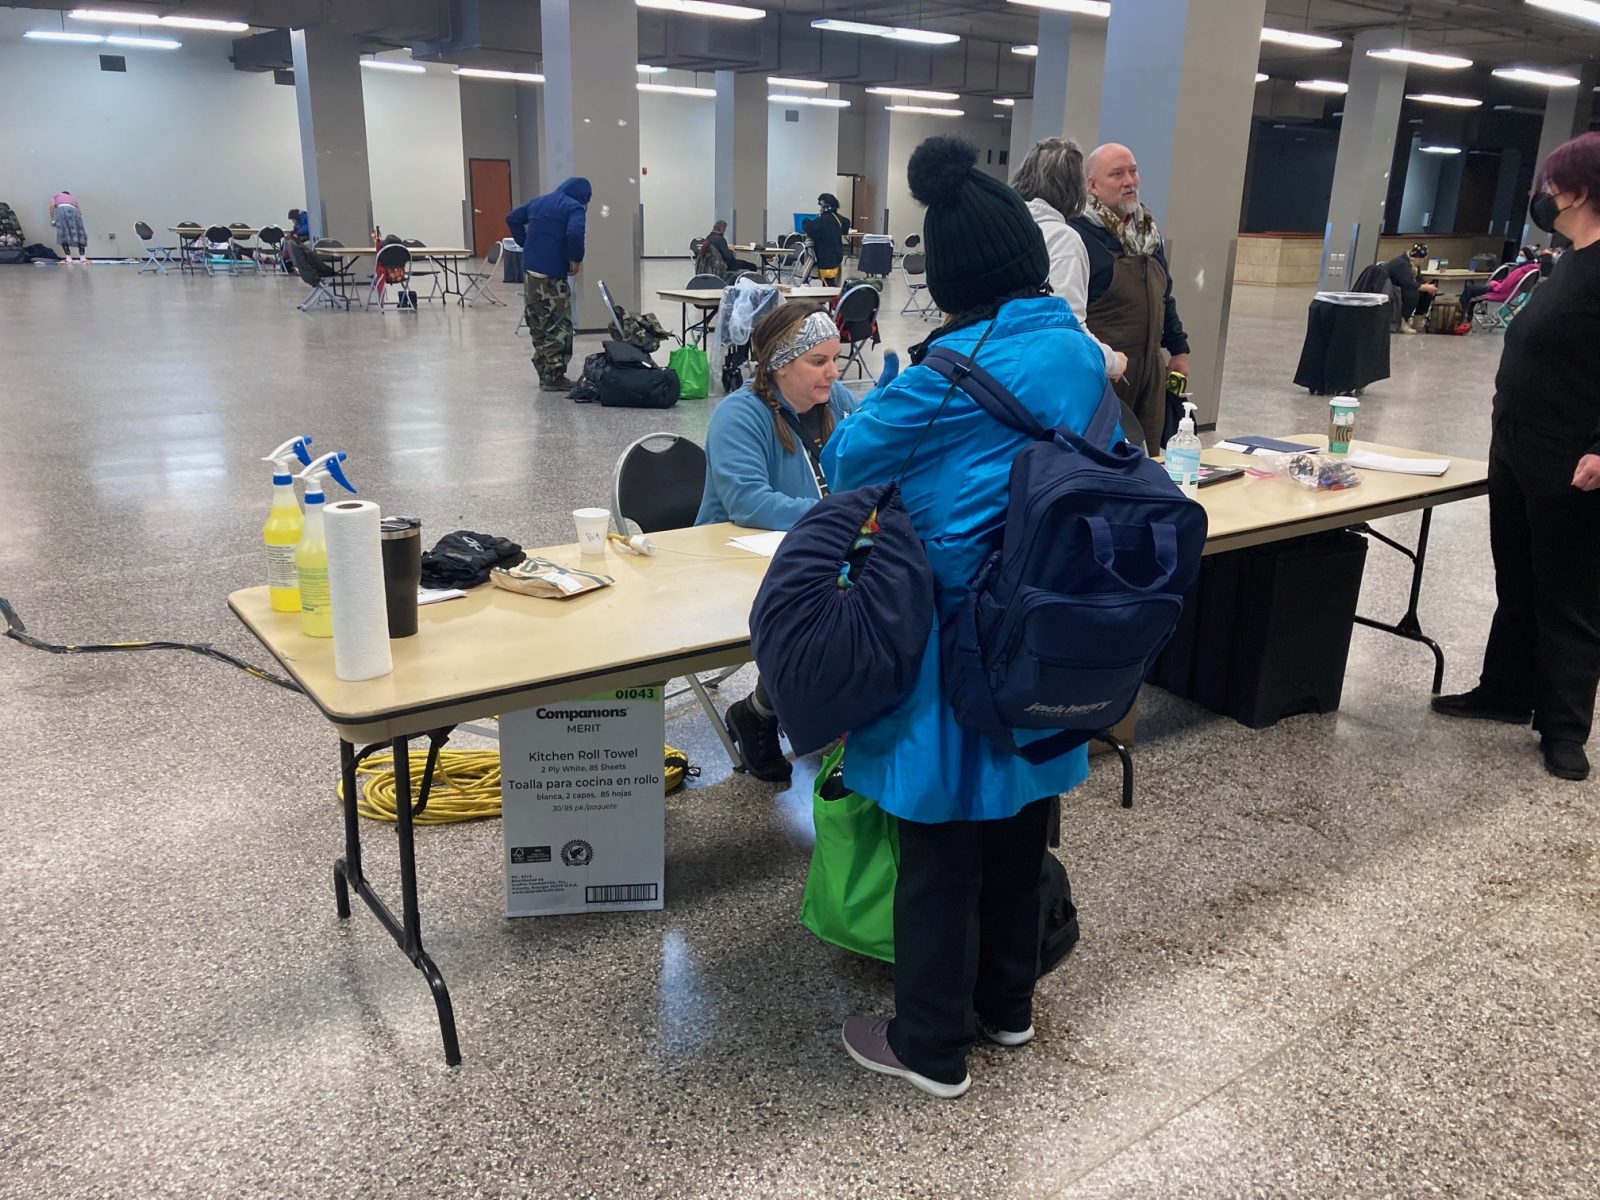 A volunteer checks a person into the emergency warming shelter at the Expo Center.